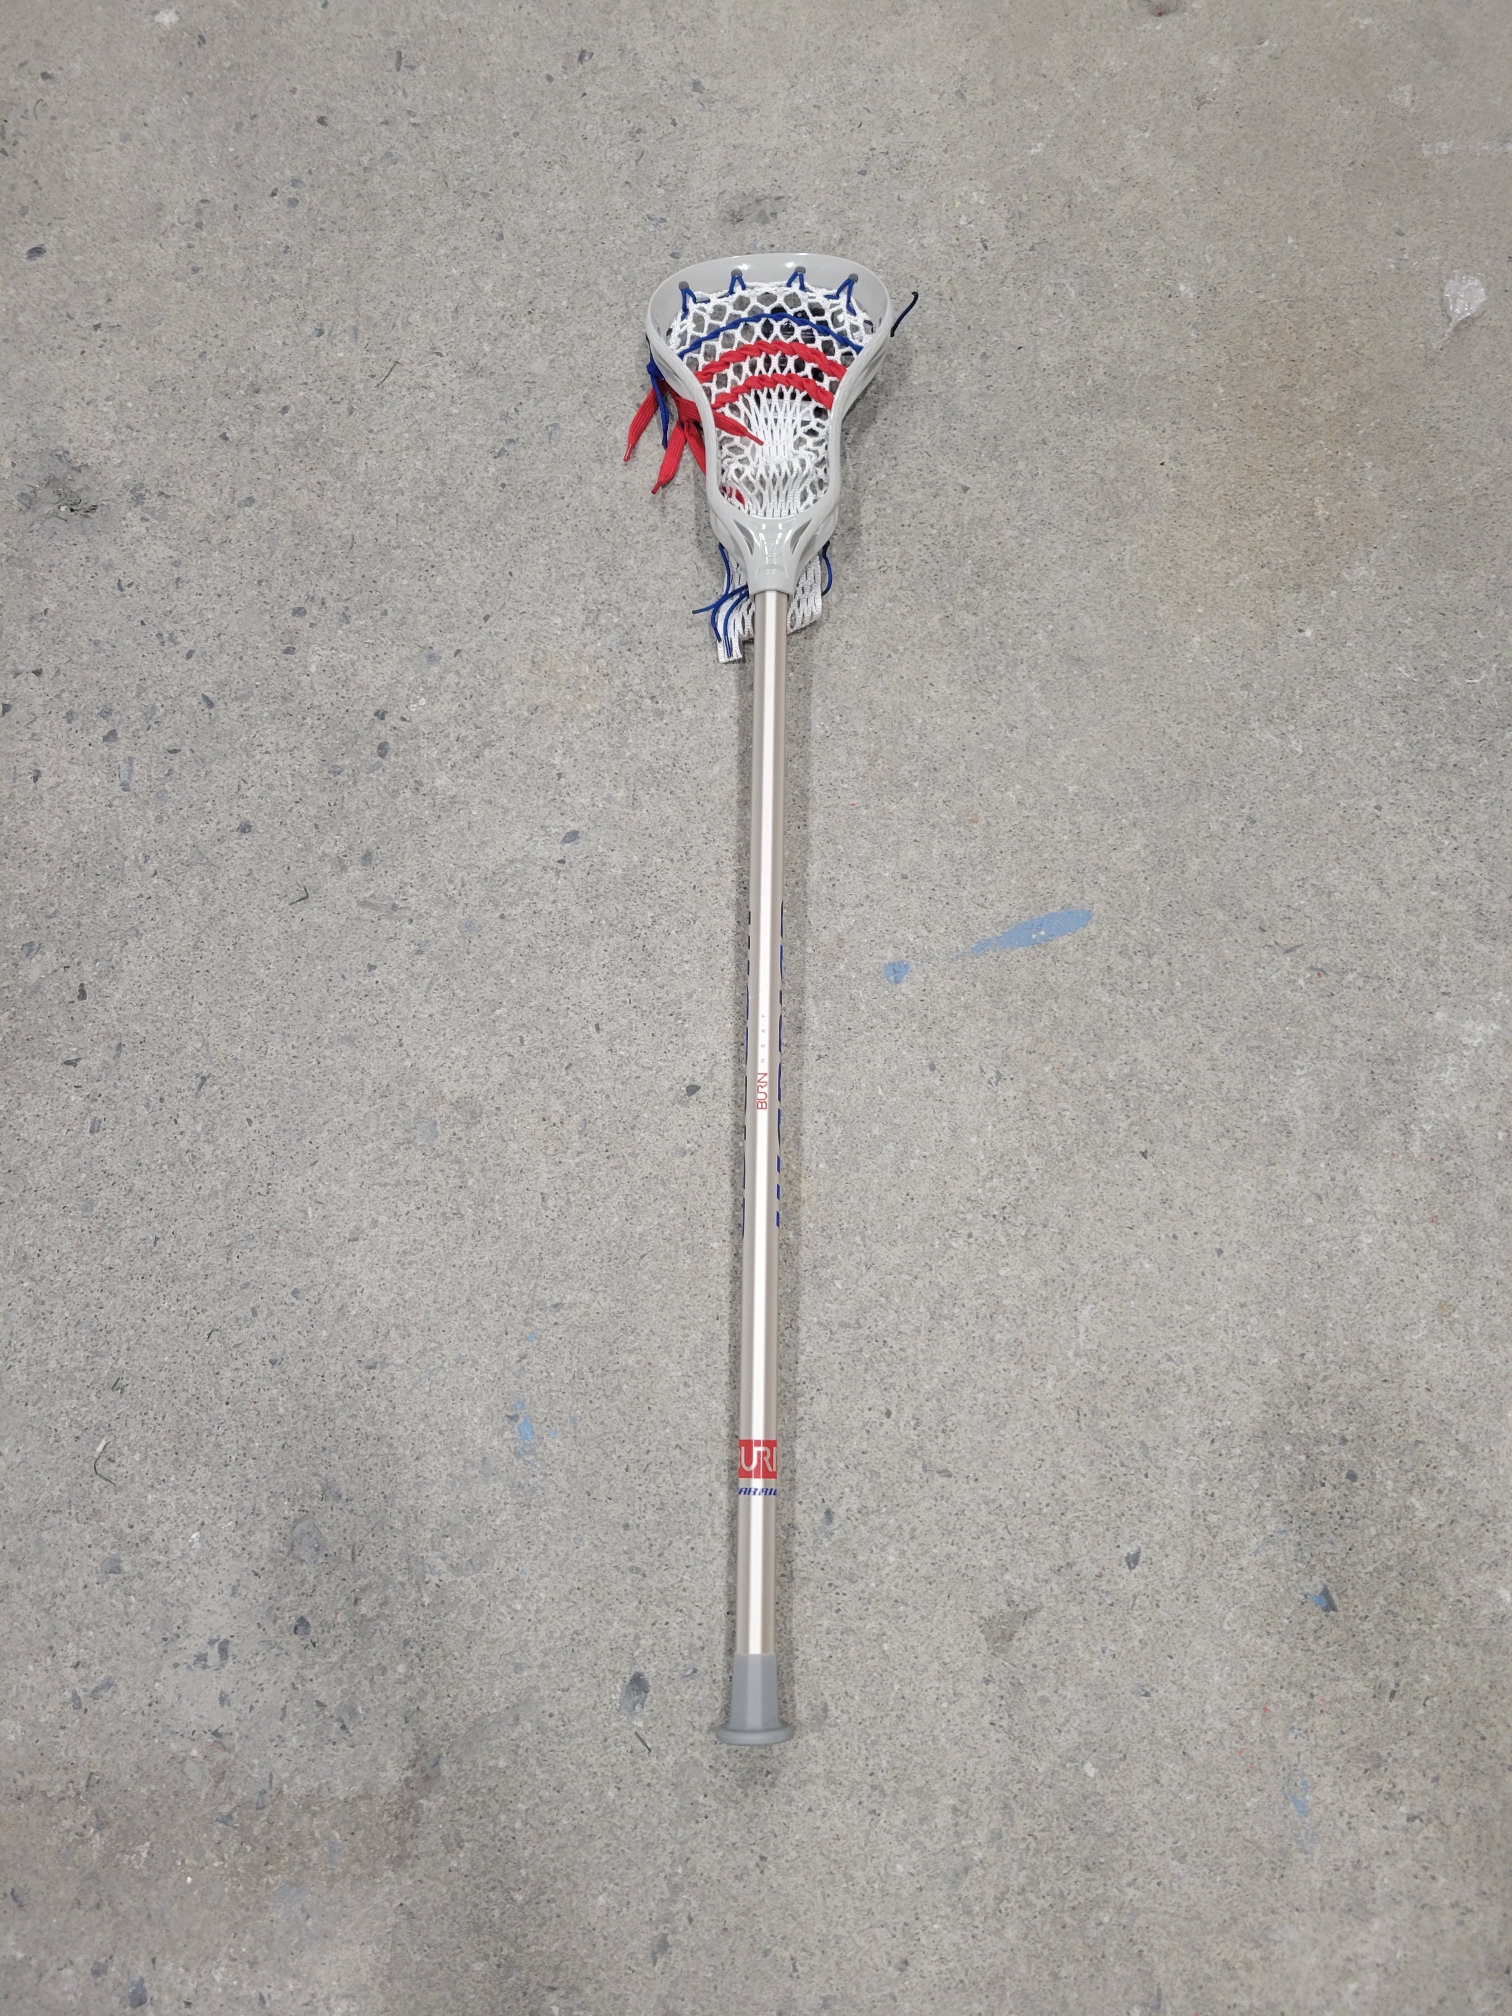 23' New Warrior Burn Next Complete Attack Stick Silver/Red, White, and Blue